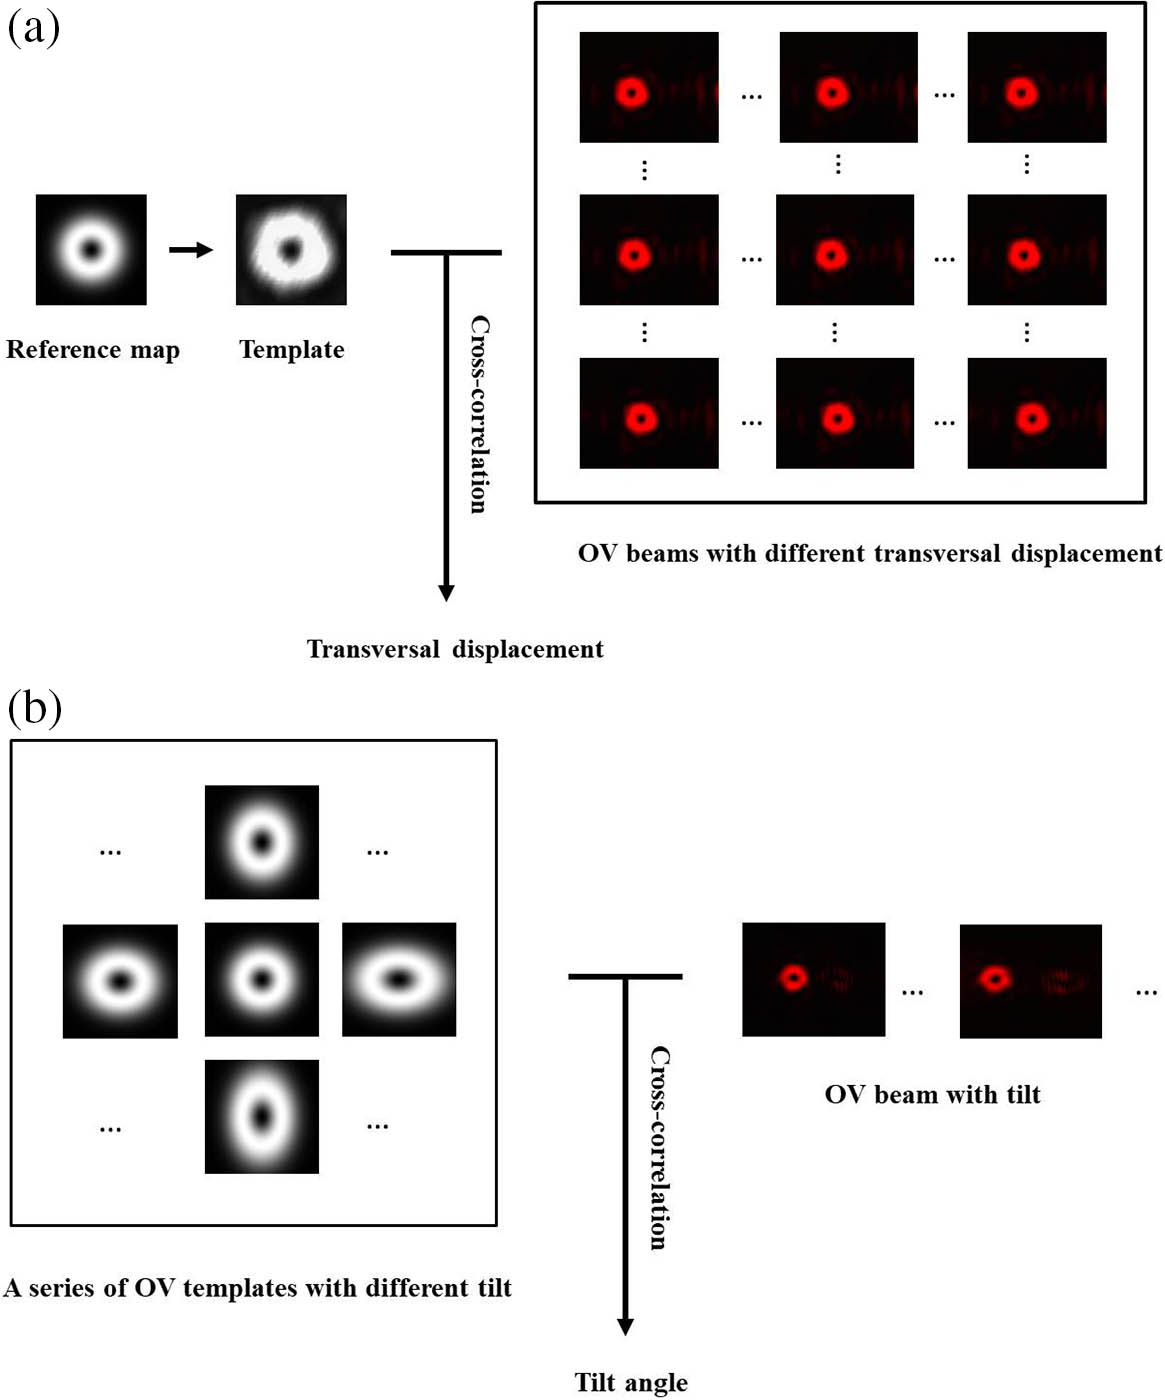 Flowcharts for measurement of misalignments of the OV beam. (a) Transversal displacements of various OV maps as captured by our experimental setup and measured using the cross-correlation algorithm. A template of an OV beam is obtained by performing a cross-correlation between a reference OV map simulated according to the experimental conditions and an OV map with no transversal displacement. (b) The tilt of the OV map can be determined by simulating a set of OV templates with set tilt angles and then cycling them with OV maps that have a tilt obtained using our method.